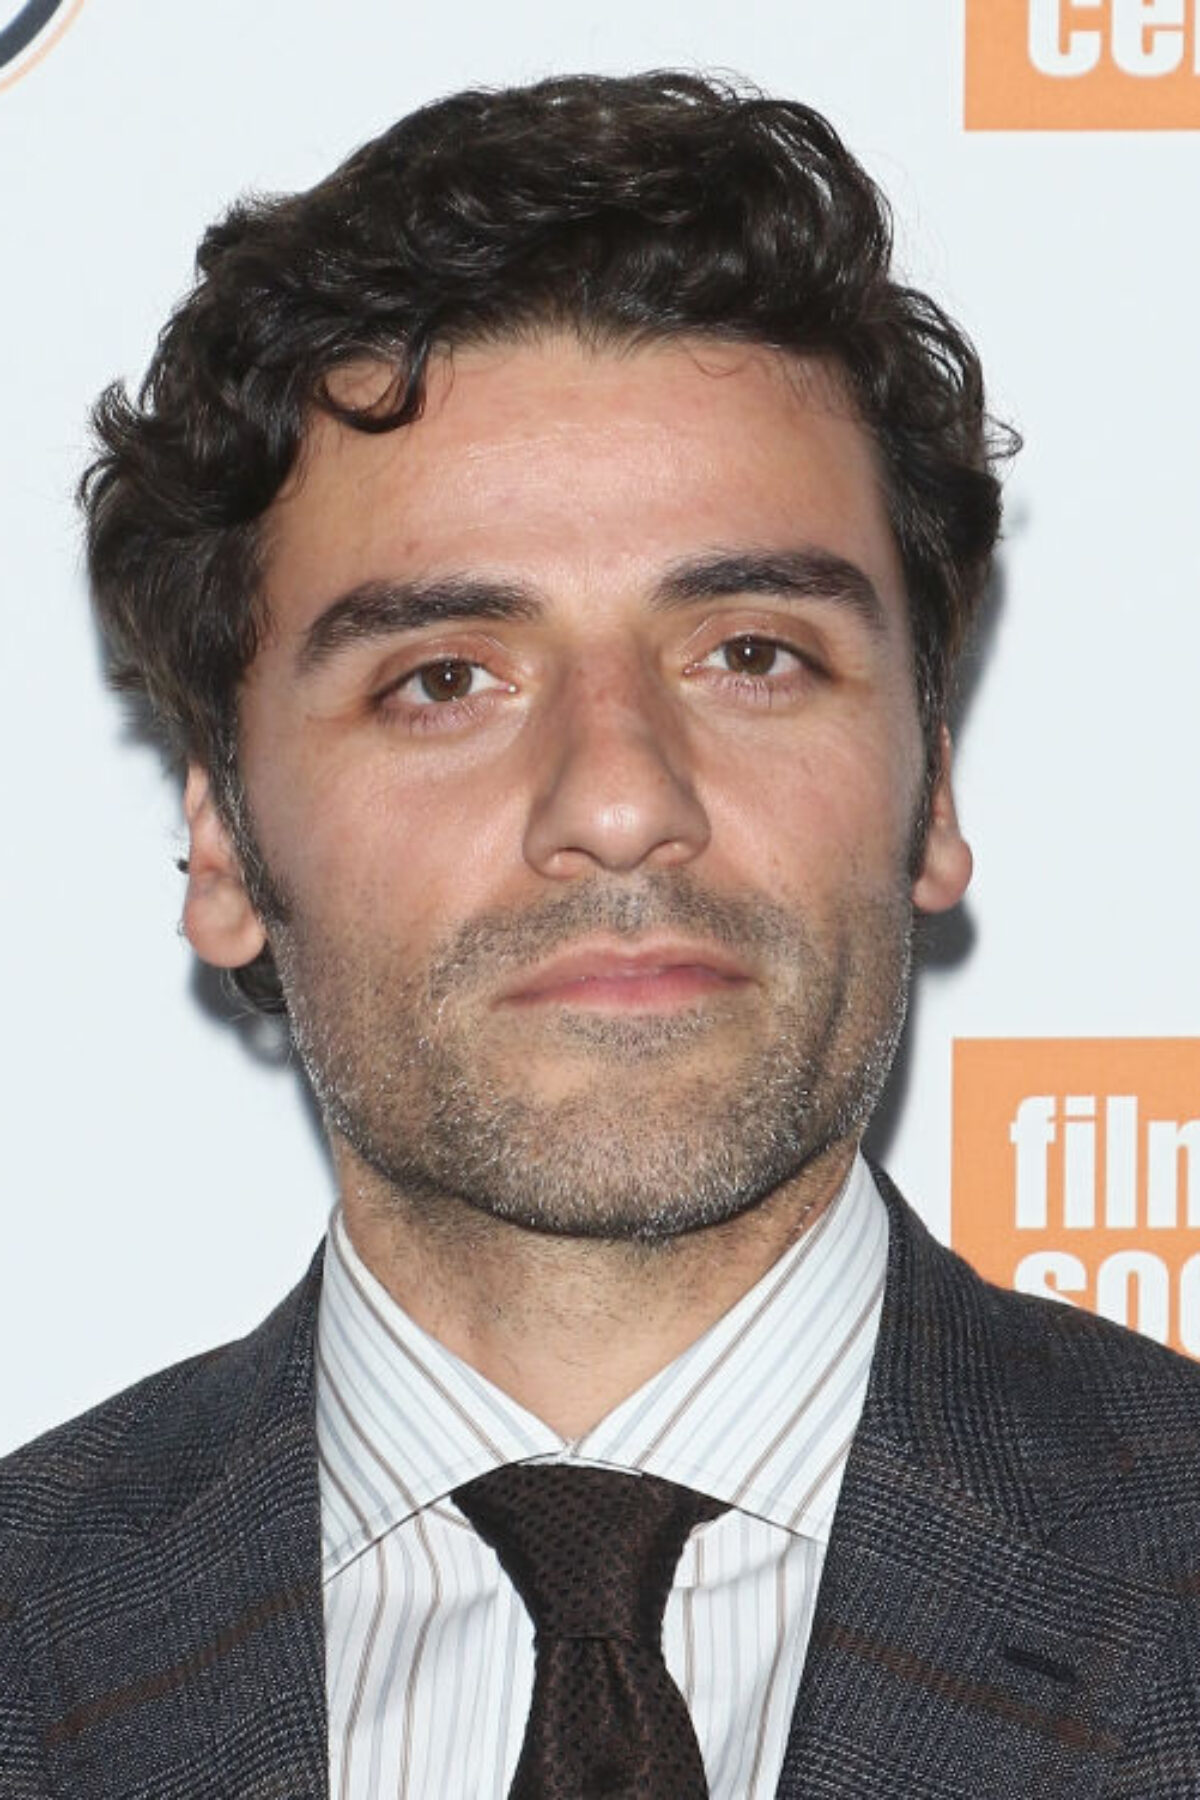 NEW YORK, NY - OCTOBER 12: Actor Oscar Isaac attends the 56th New York Film Festival premiere of 